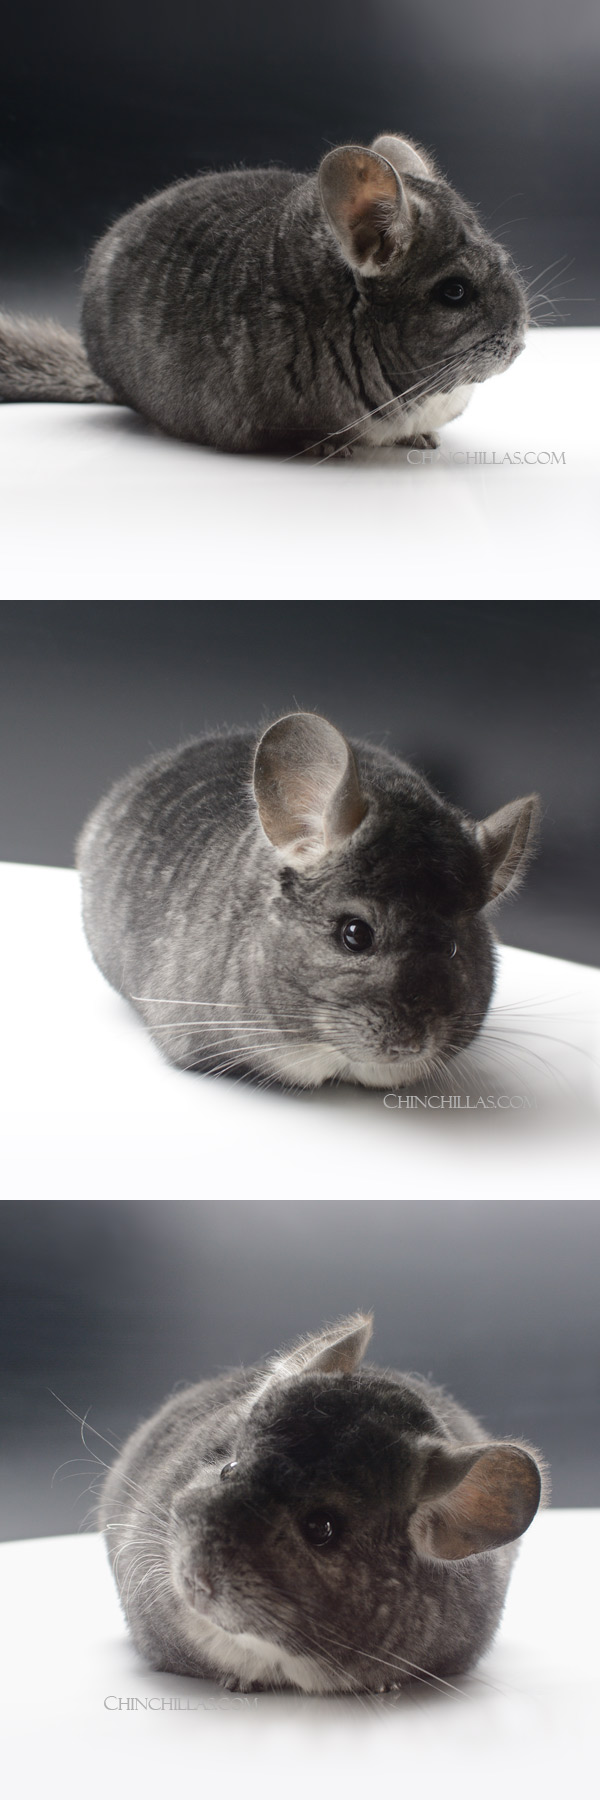 Chinchilla or related item offered for sale or export on Chinchillas.com - 24047 Large Blocky Show Quality Standard Male Chinchilla